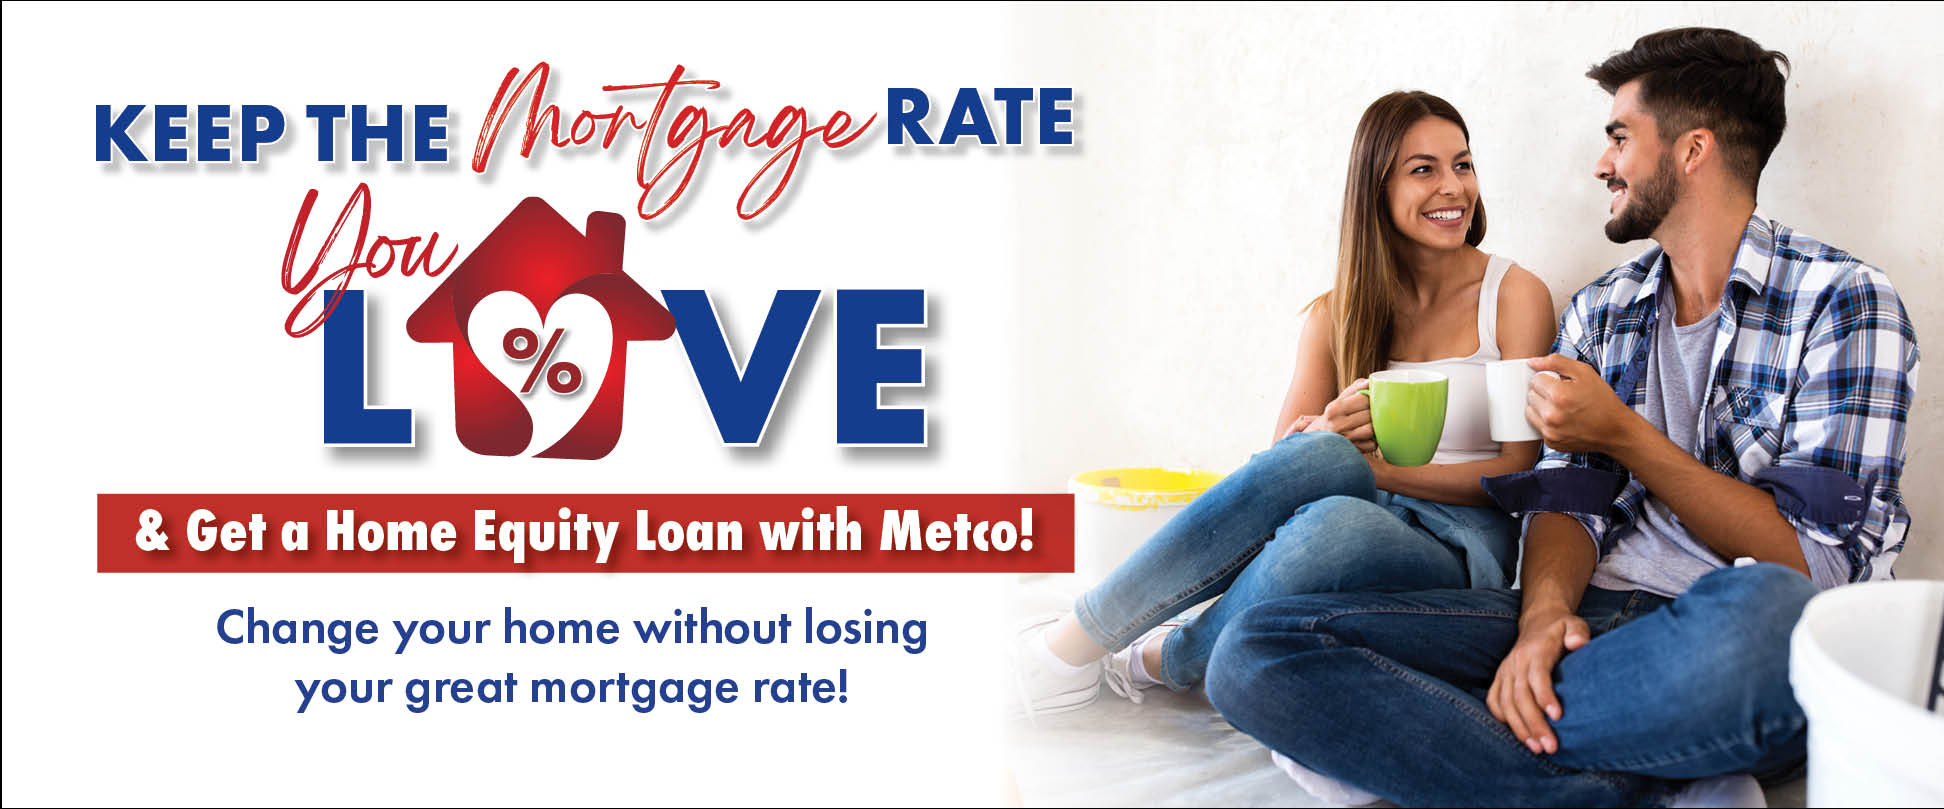 Keep the Mortgage Rate you LOVE & get a home equity loan with Metco! Change your home without losing your great mortgage rate!